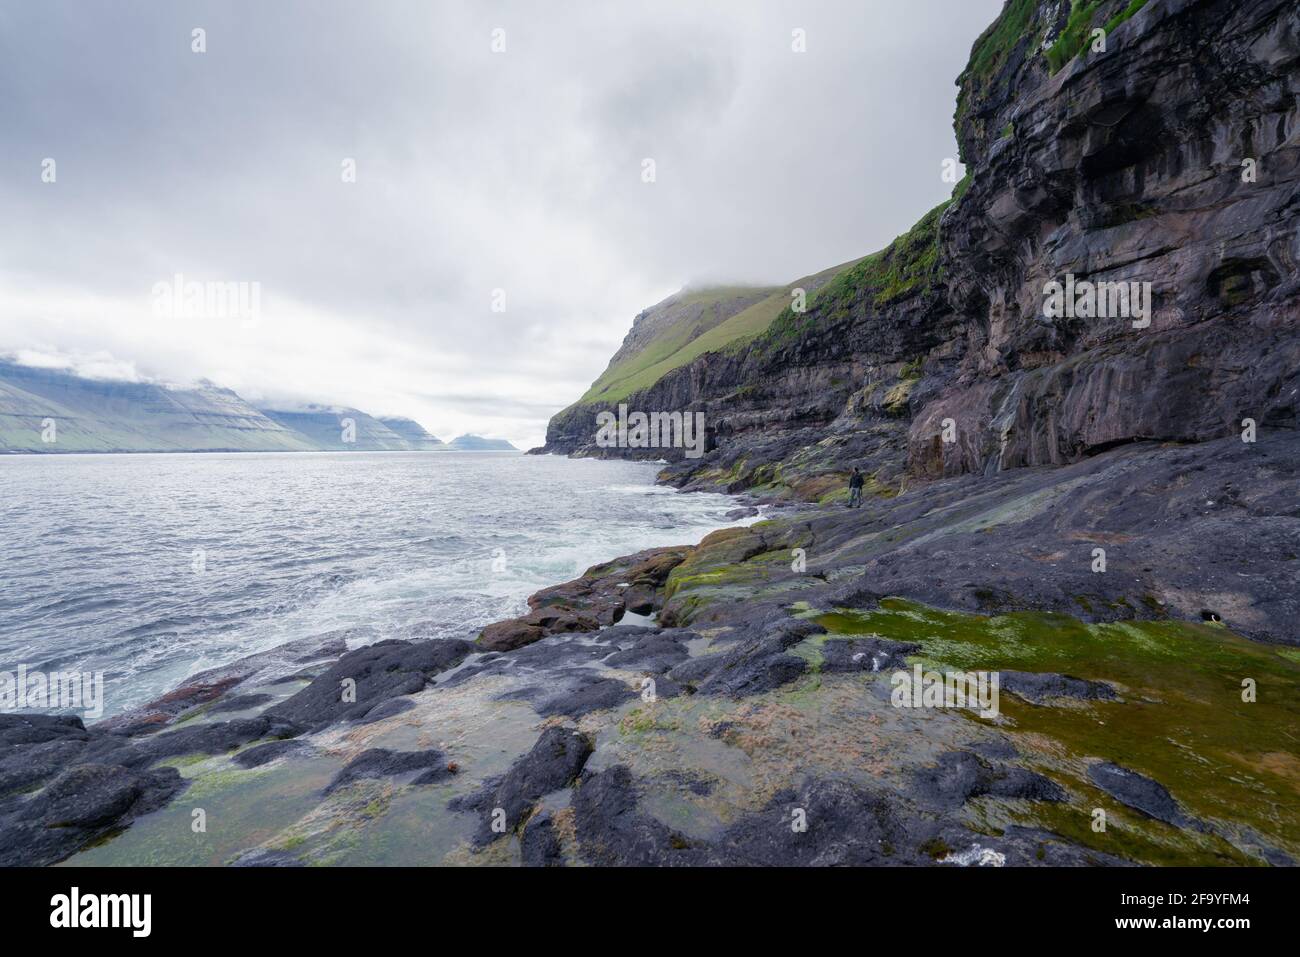 Rocky Faroese shore on a cloudy day. Cliffs of Kalsoy island. Late cloudy morning in the wild fjords of Faroe Islands near the Mikladalur village. Stock Photo